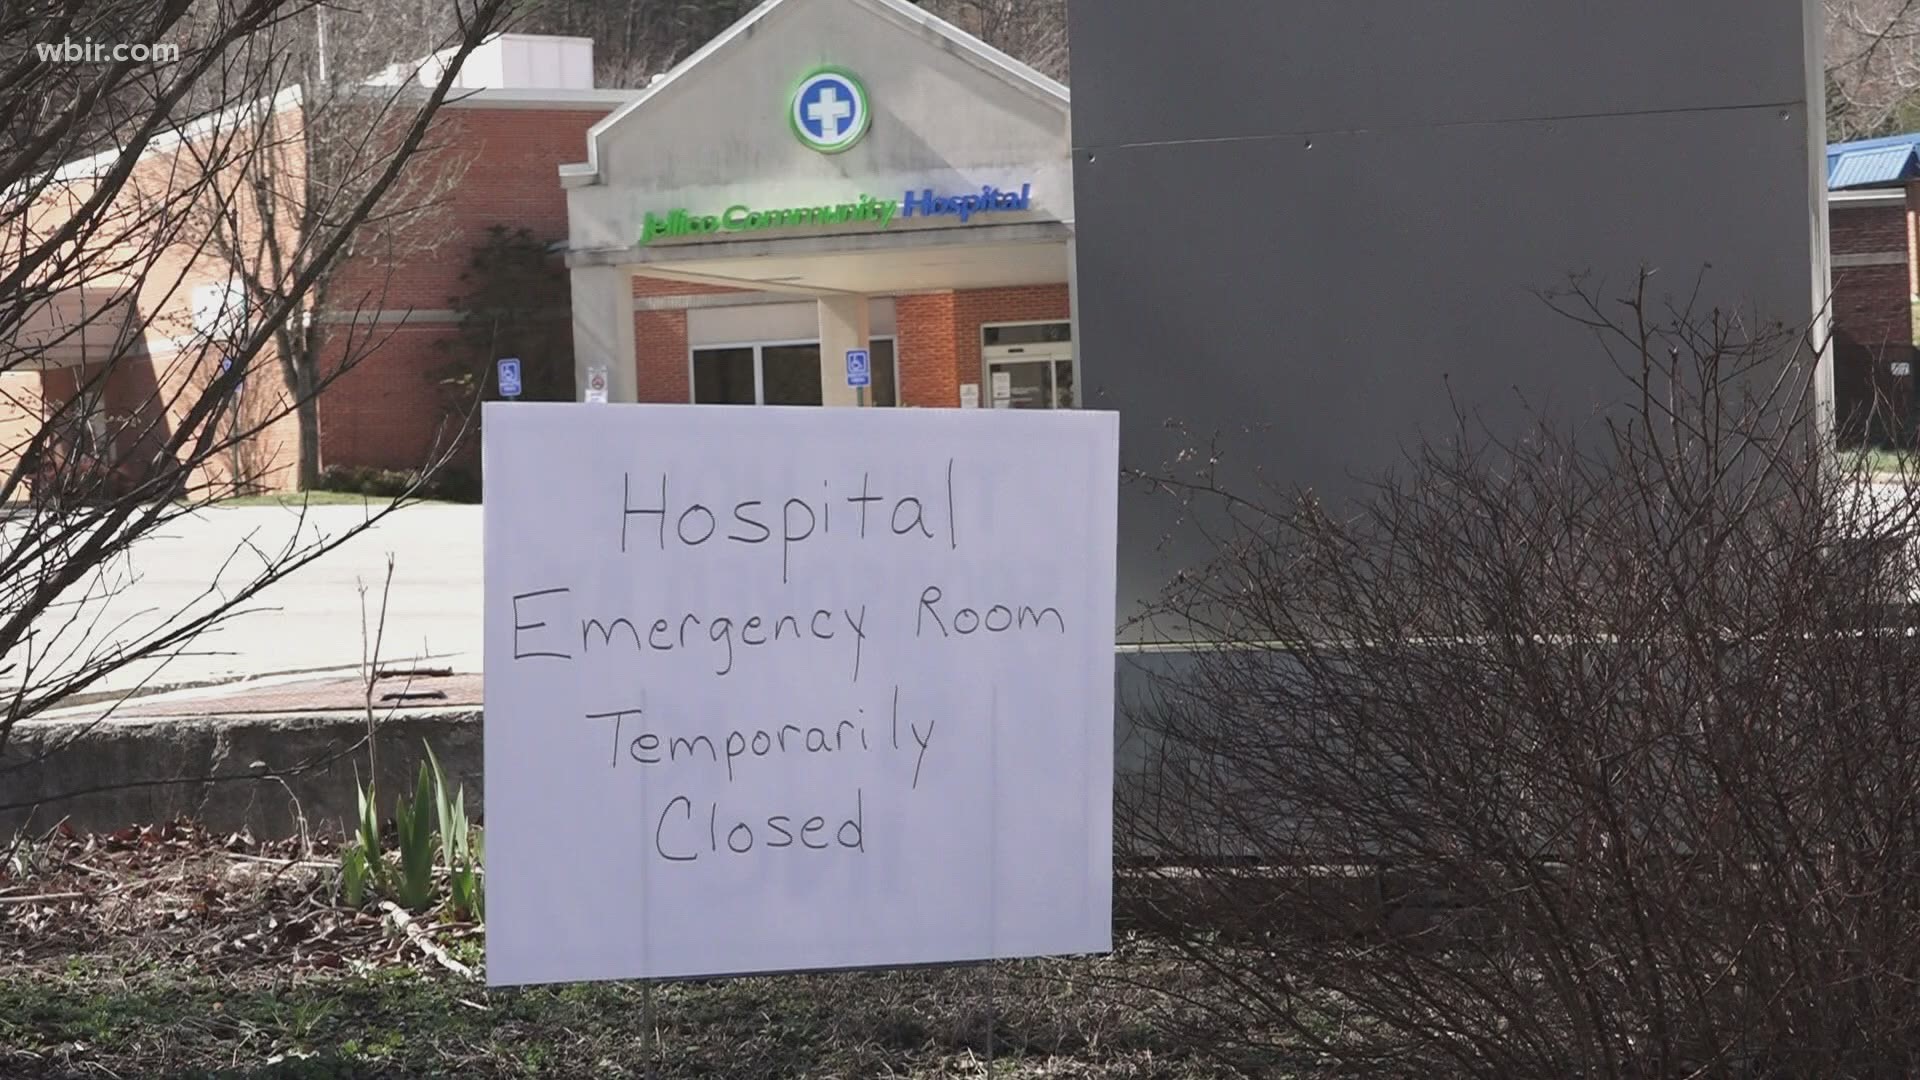 The sign says it's only temporary, but the city kicked the hospital company out of town -- leaving Jellico without a hospital.